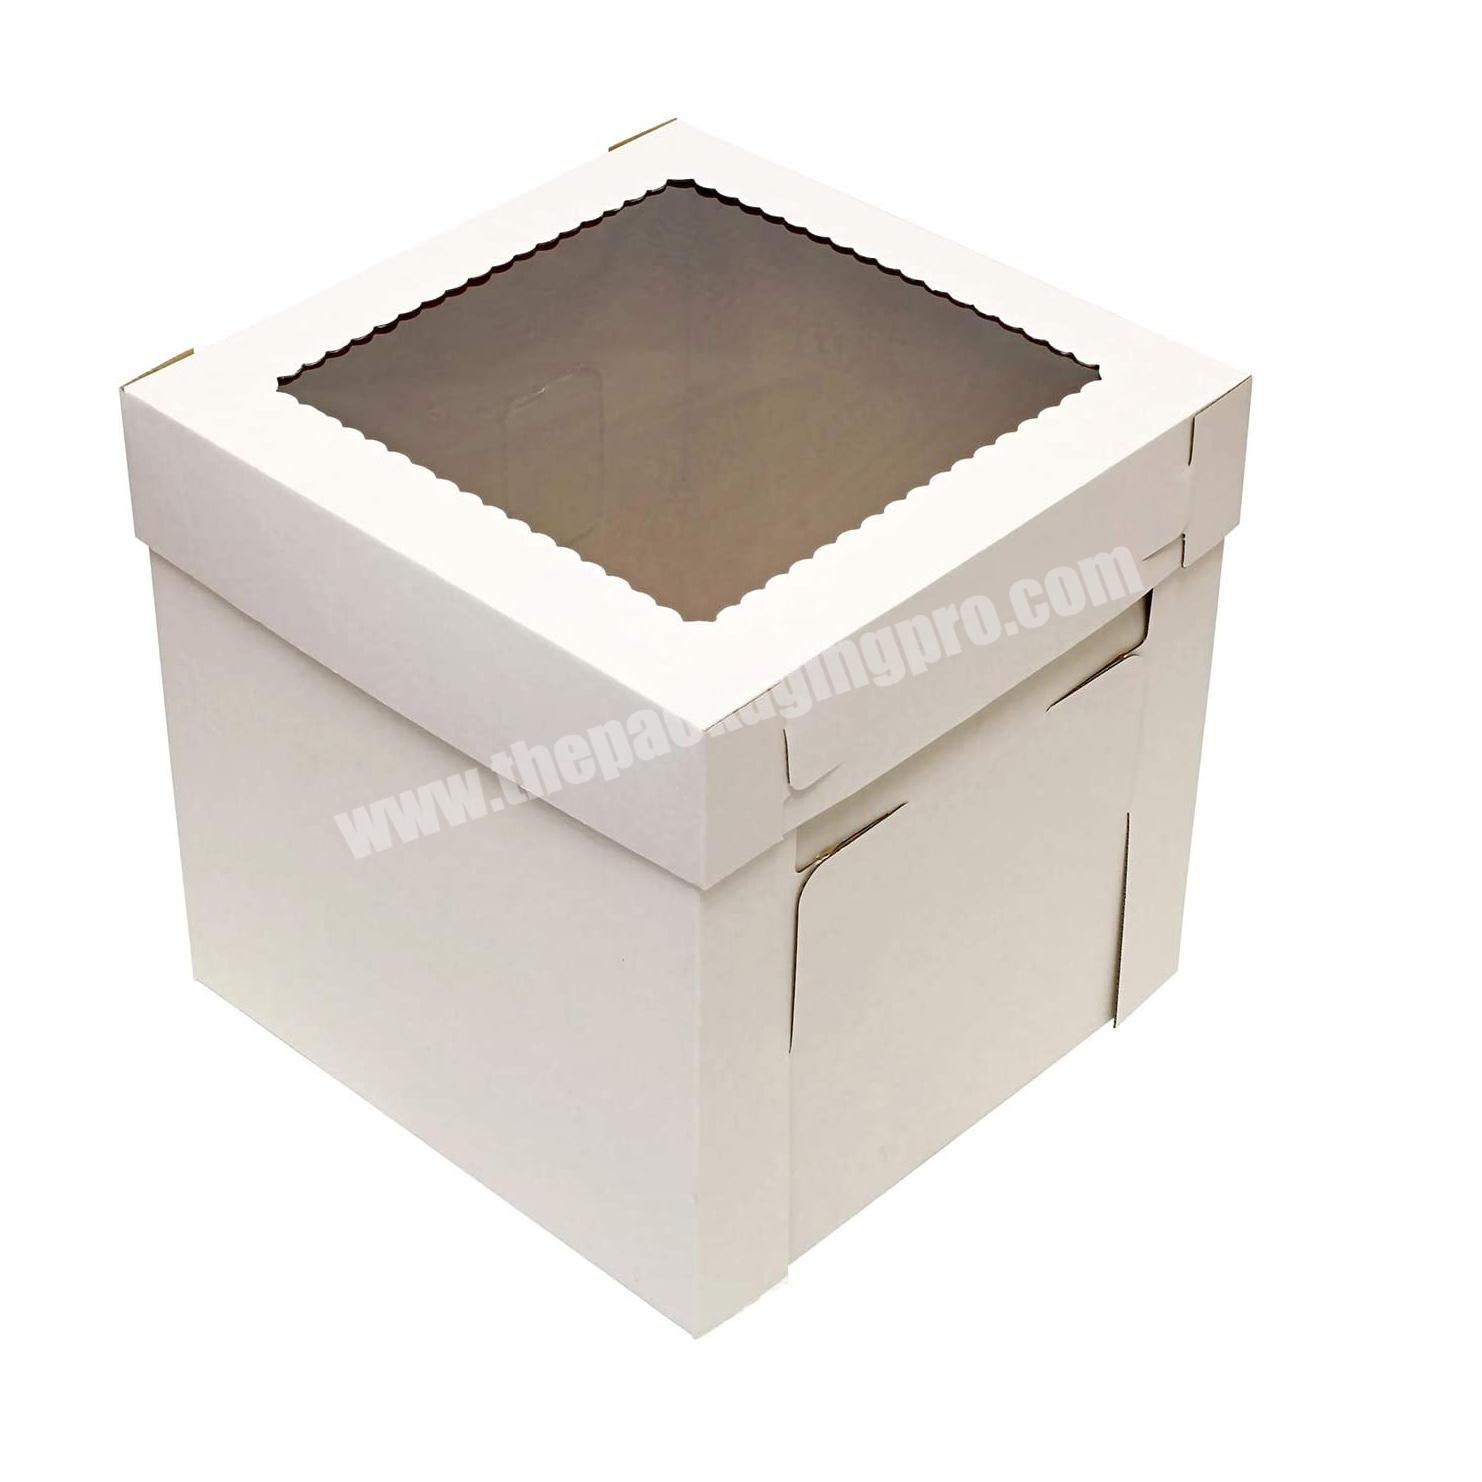 Food Grade Disposable Paper Printing Custom logo 10 x 10 x 8in White Cake Bakery Containers Boxes in bulk